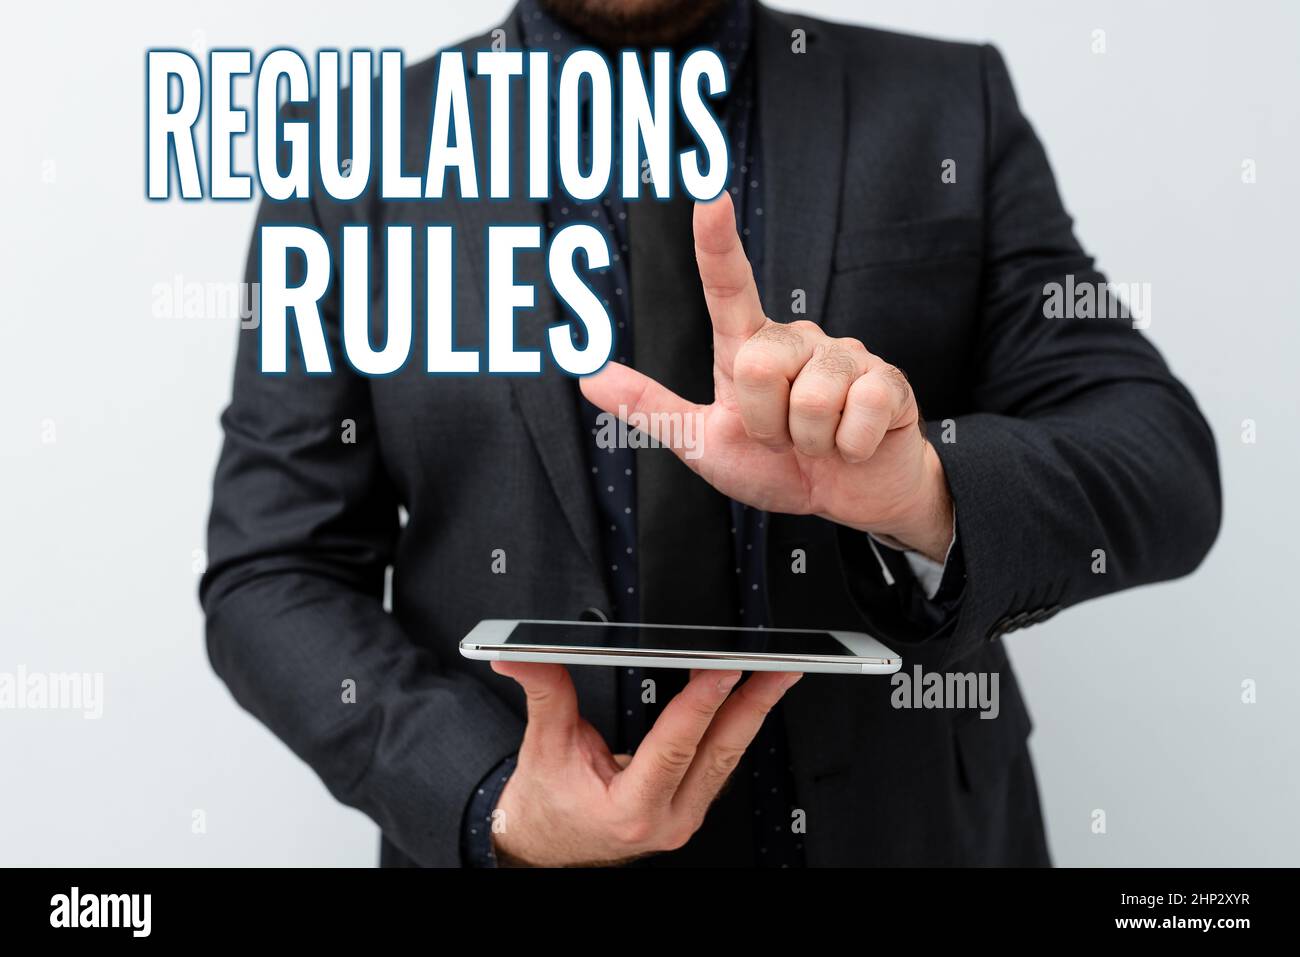 Text showing inspiration Regulations Rules, Business concept Standard Statement Procedure govern to control a conduct Presenting New Technology Ideas Stock Photo